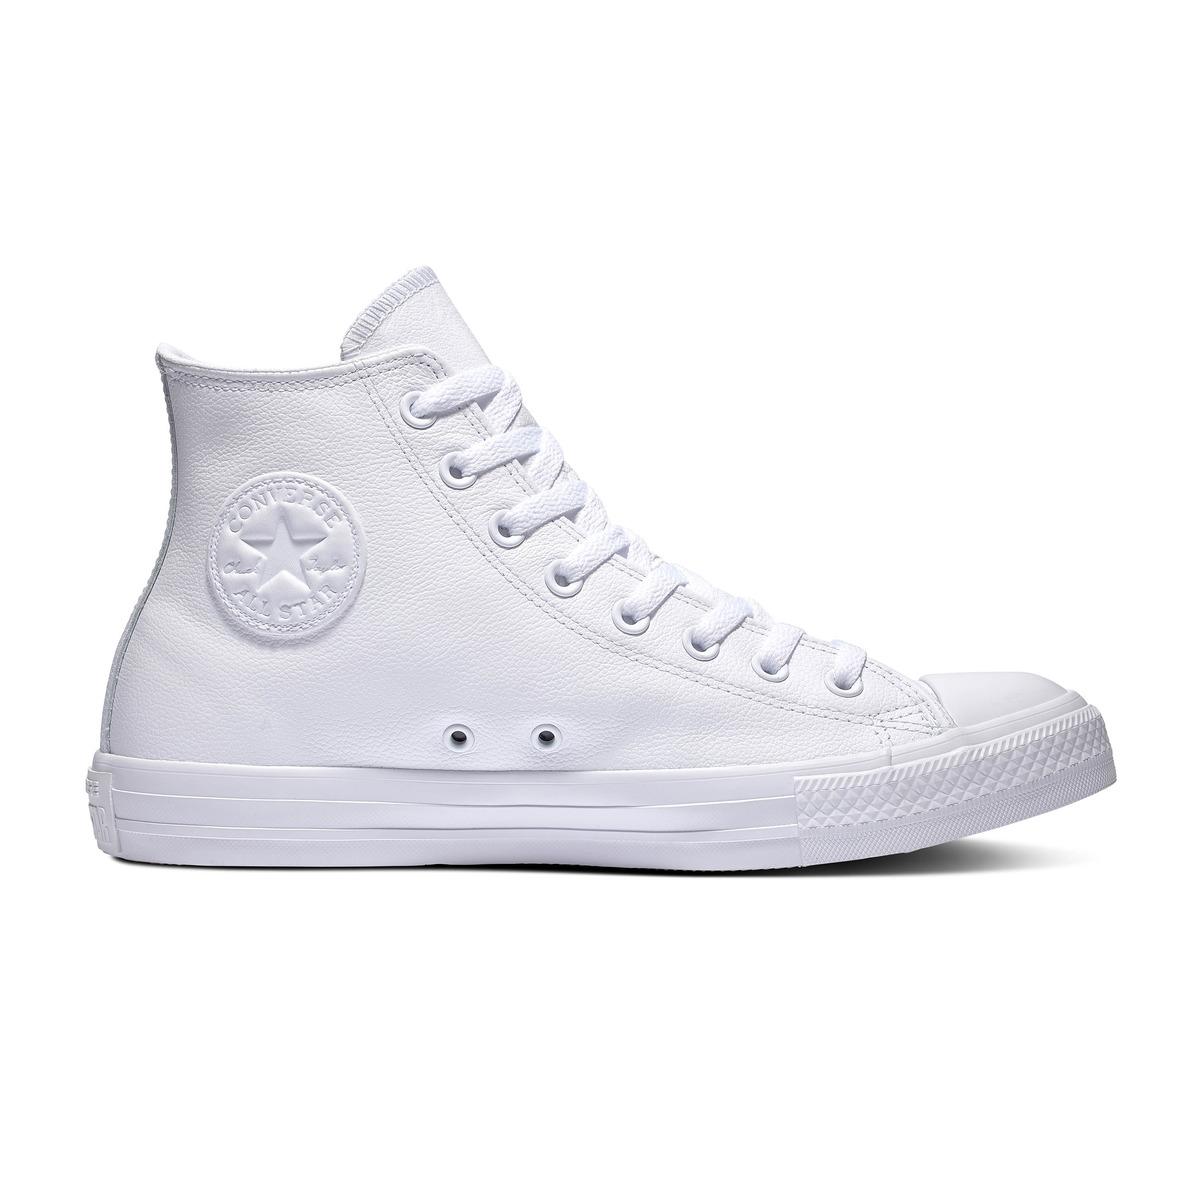 Converse White Chuck Taylor All Star Leather High Unisex Casual Trainers 